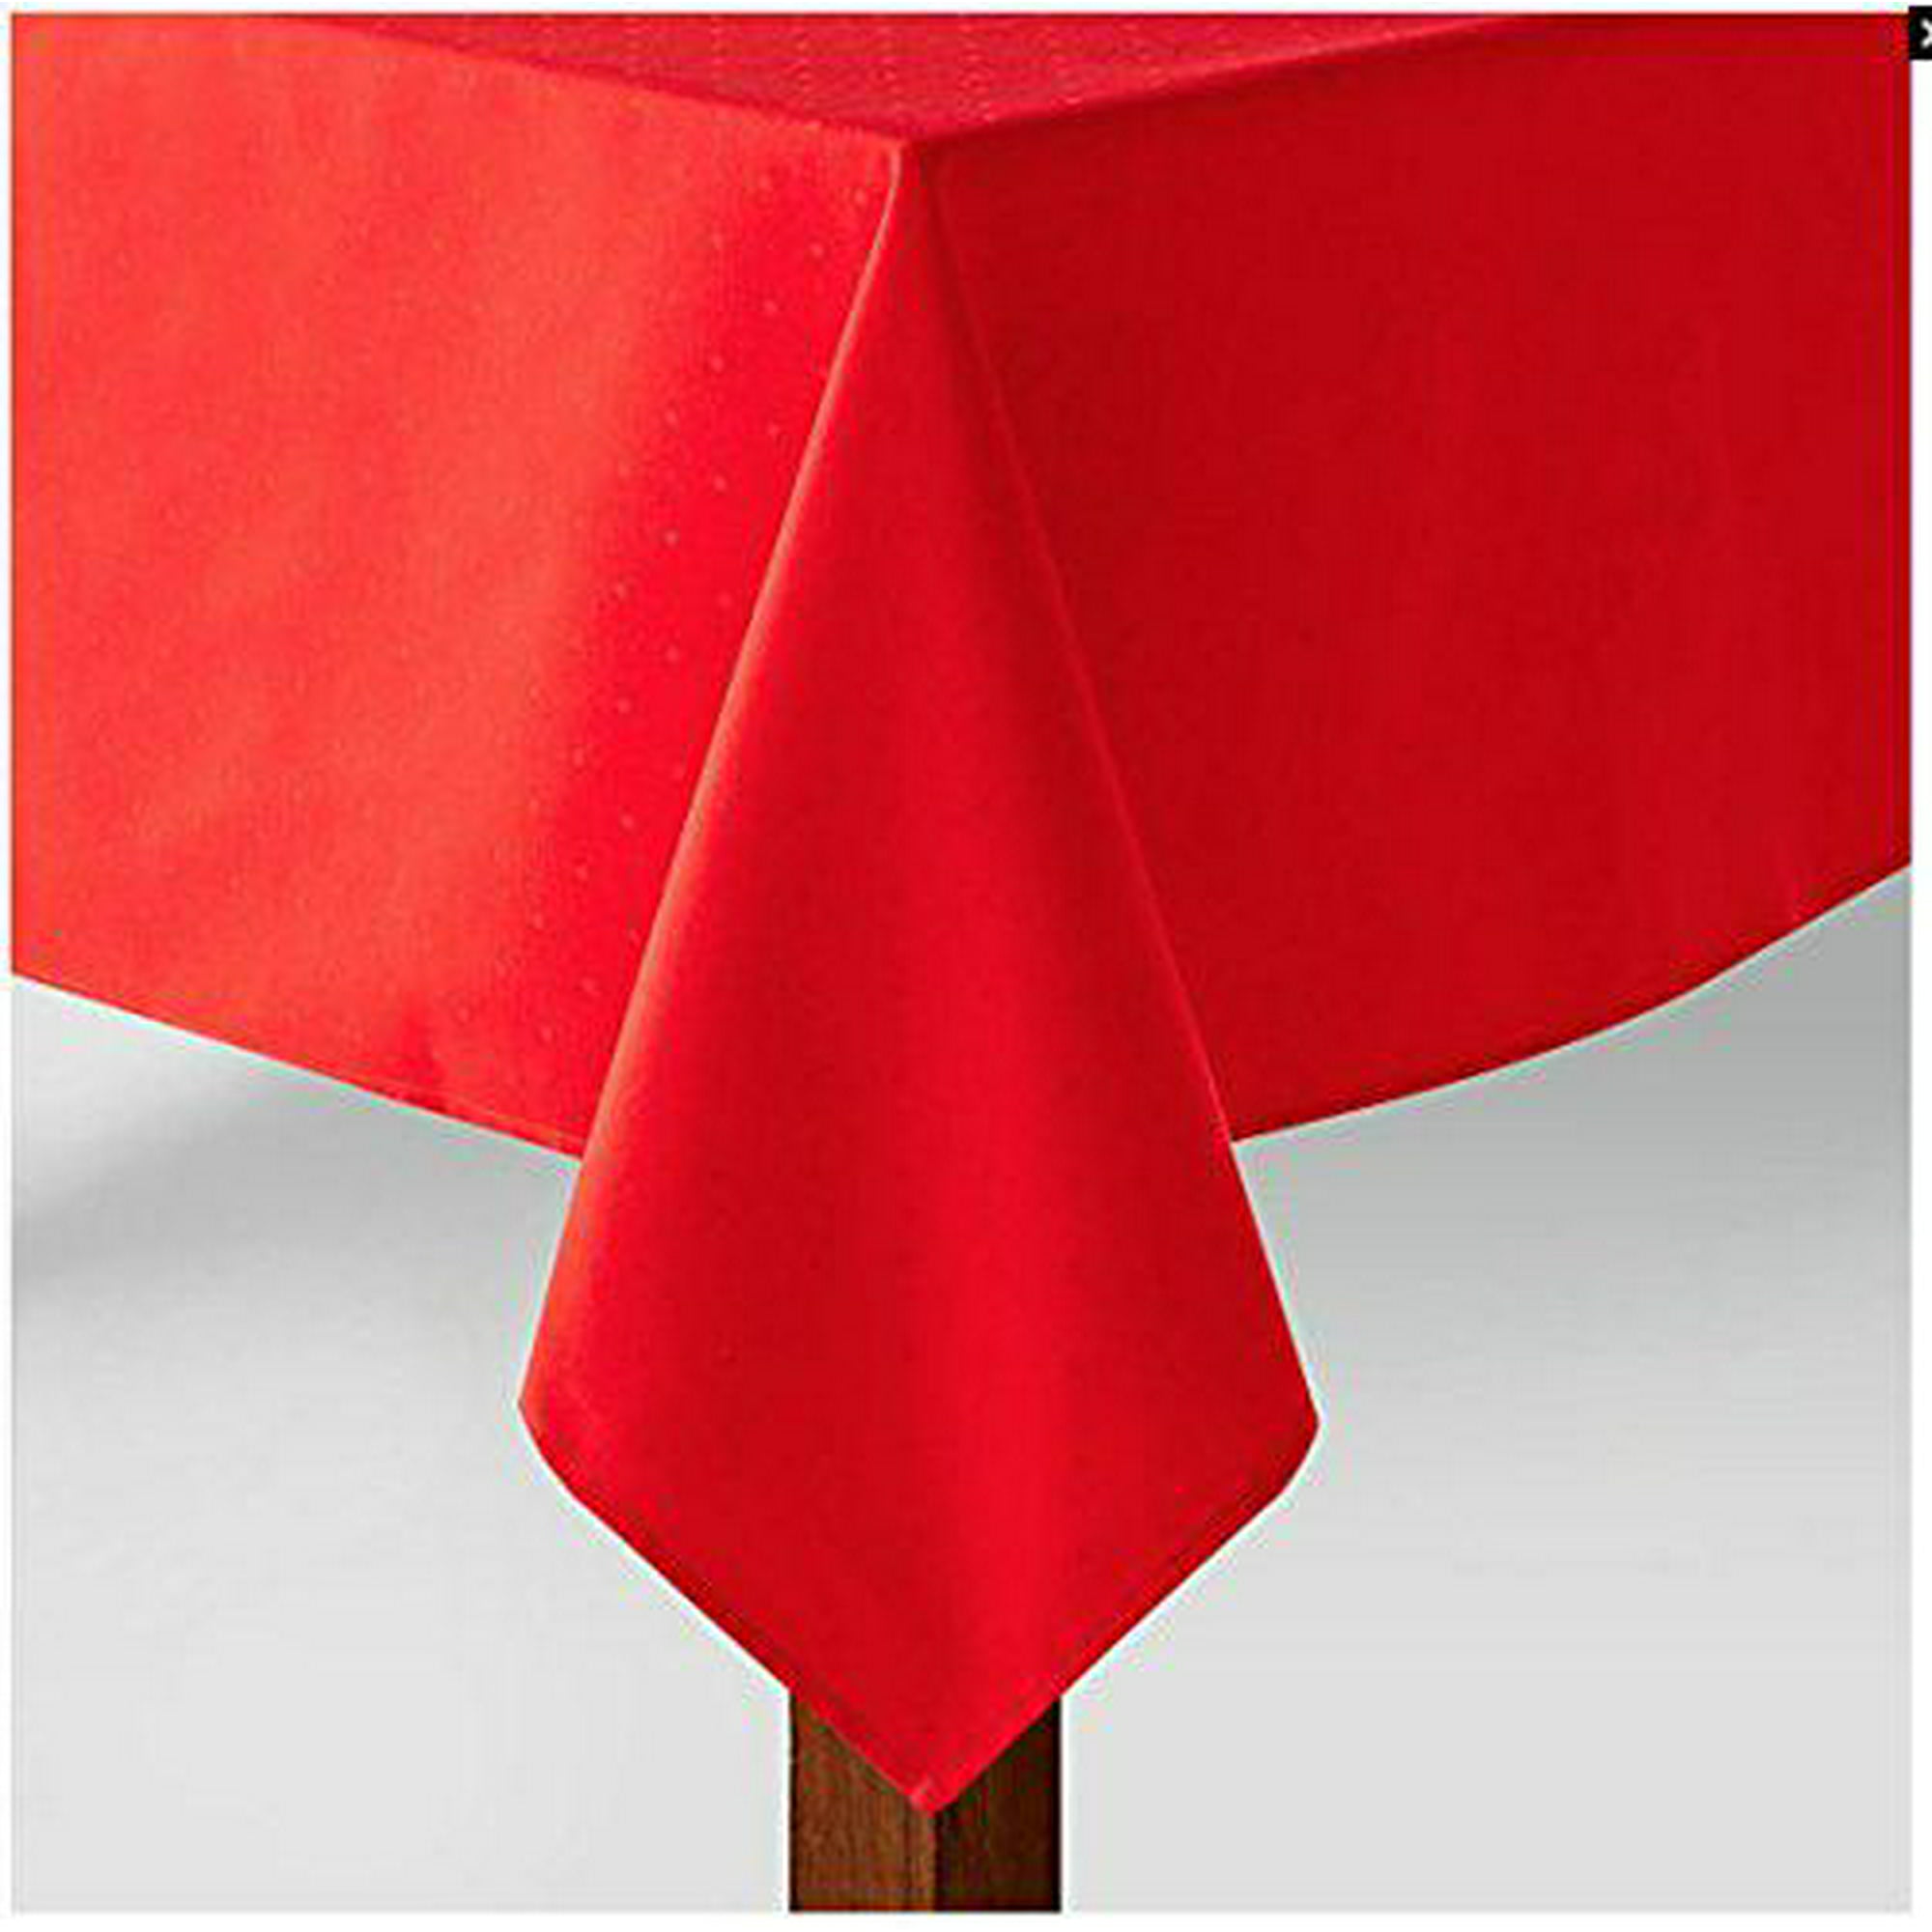 Kate Spade New York Cranberry Red Larabee Dot Fabric Tablecloth (70